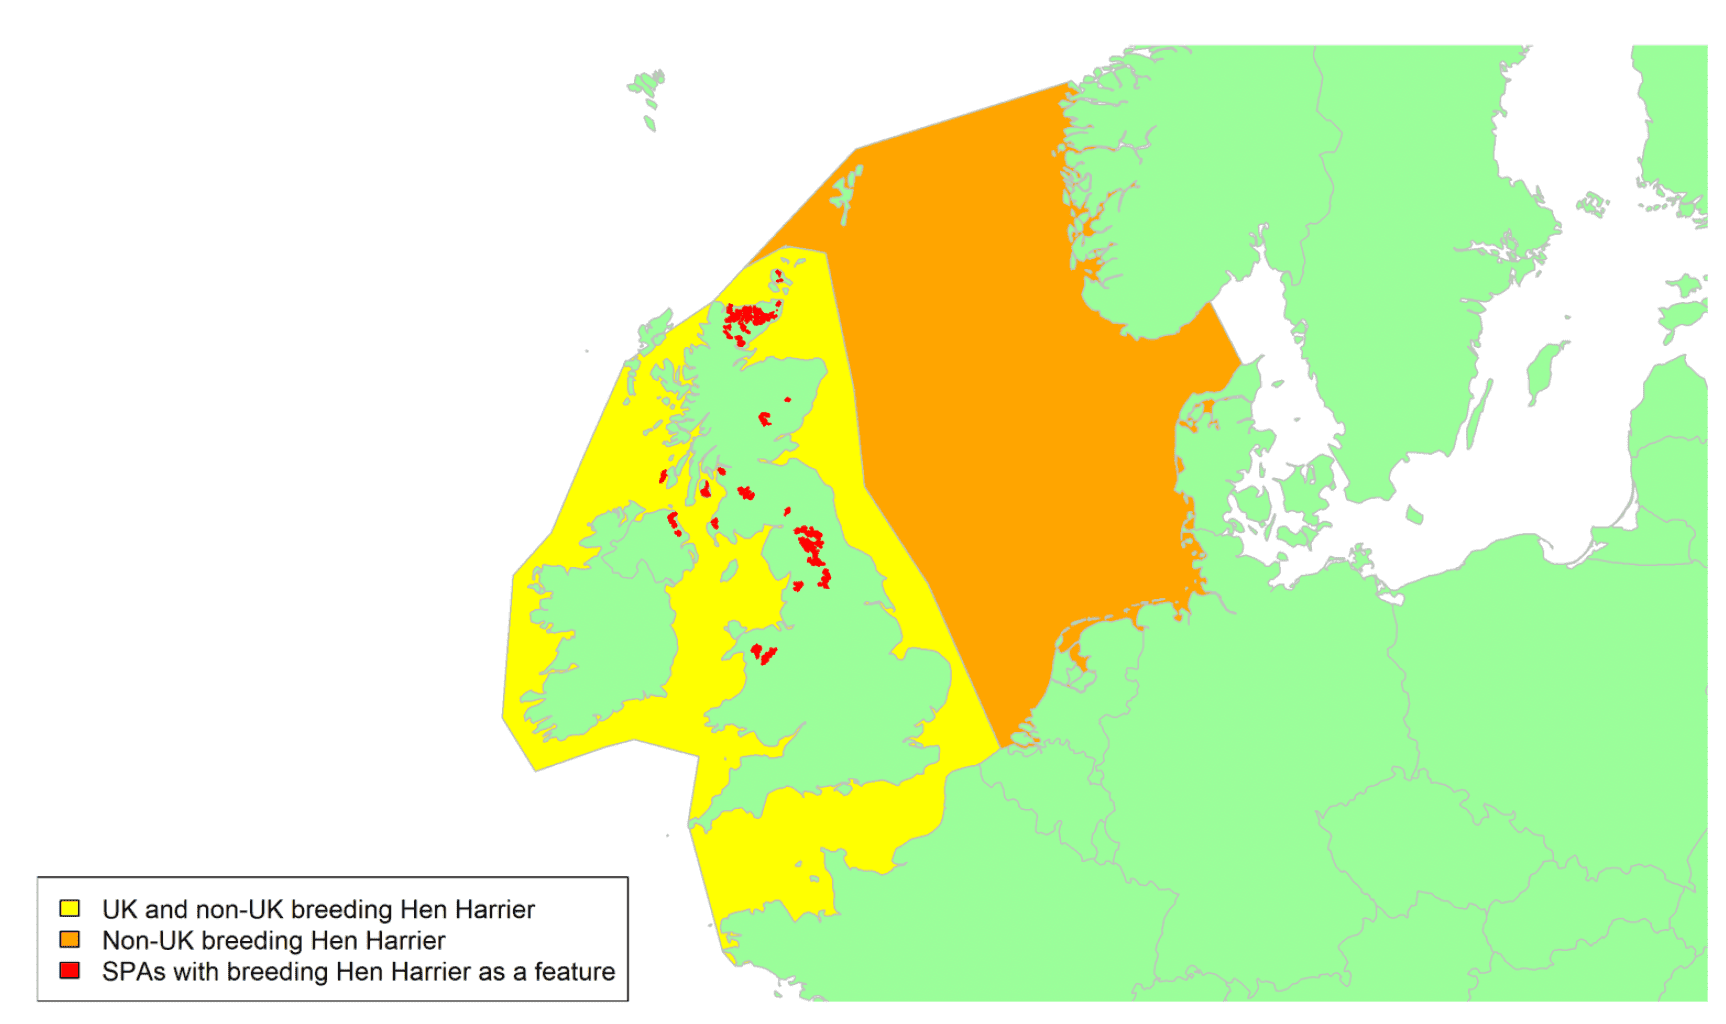 Map of North West Europe showing migratory routes and SPAs within the UK for Hen Harrier as described in the text below.